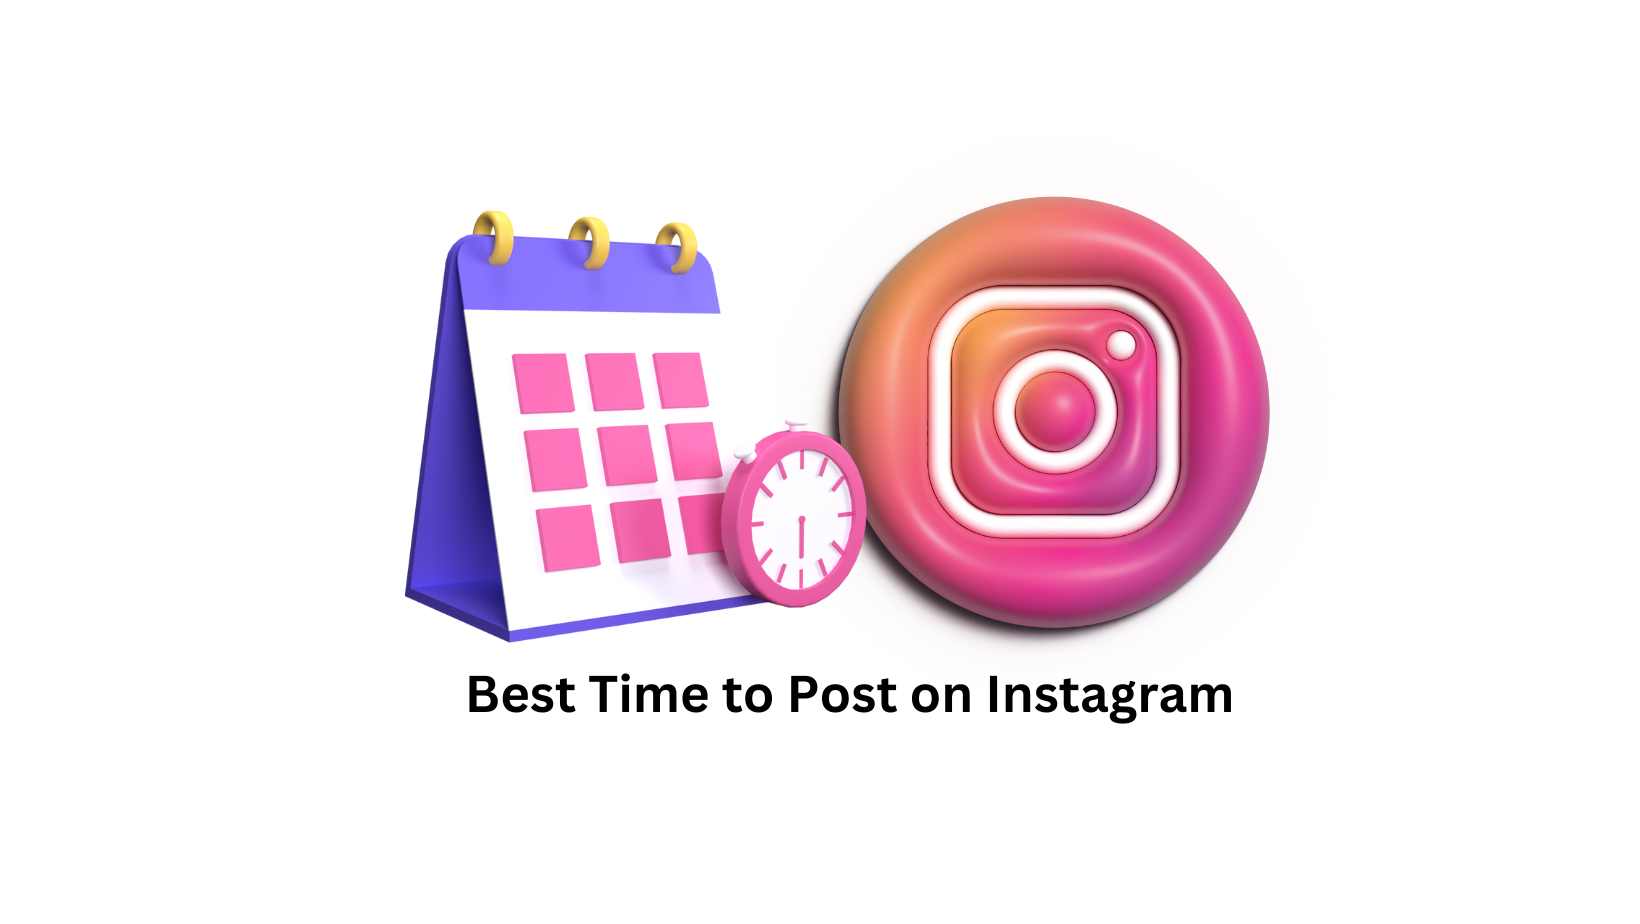 best times to post on Instagram